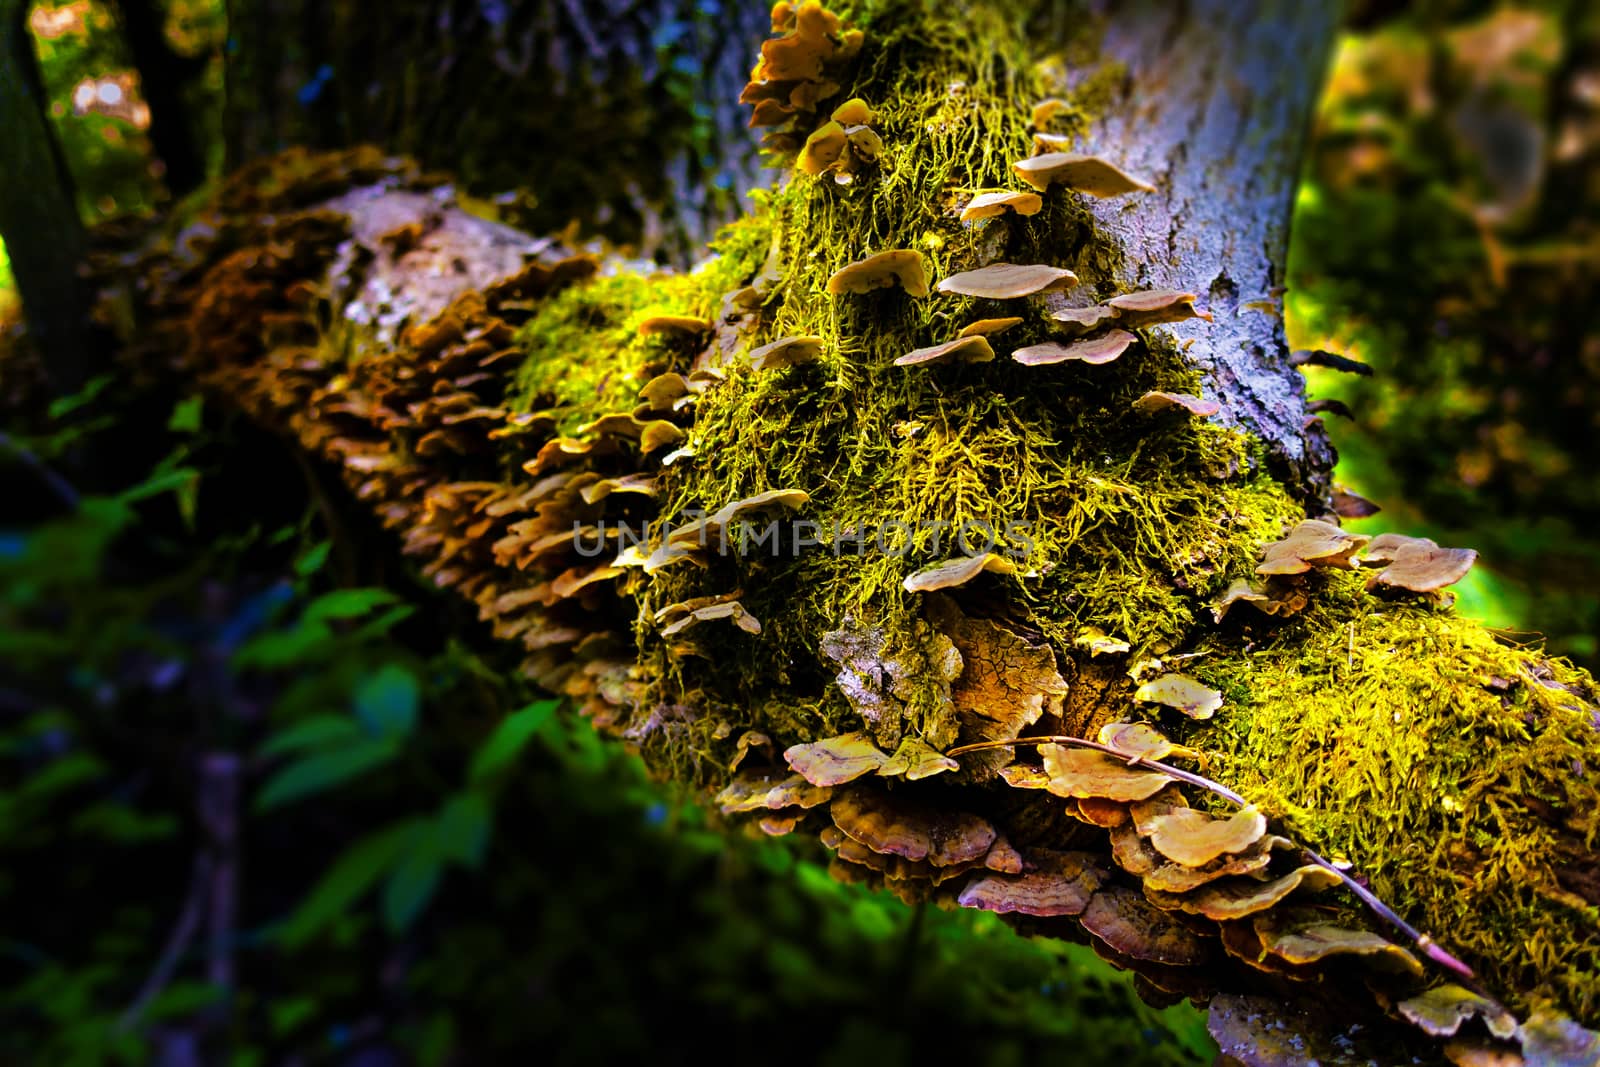 A close up of mushrooms on moss covered tree trunk, backlit, greenery in the woods, nature